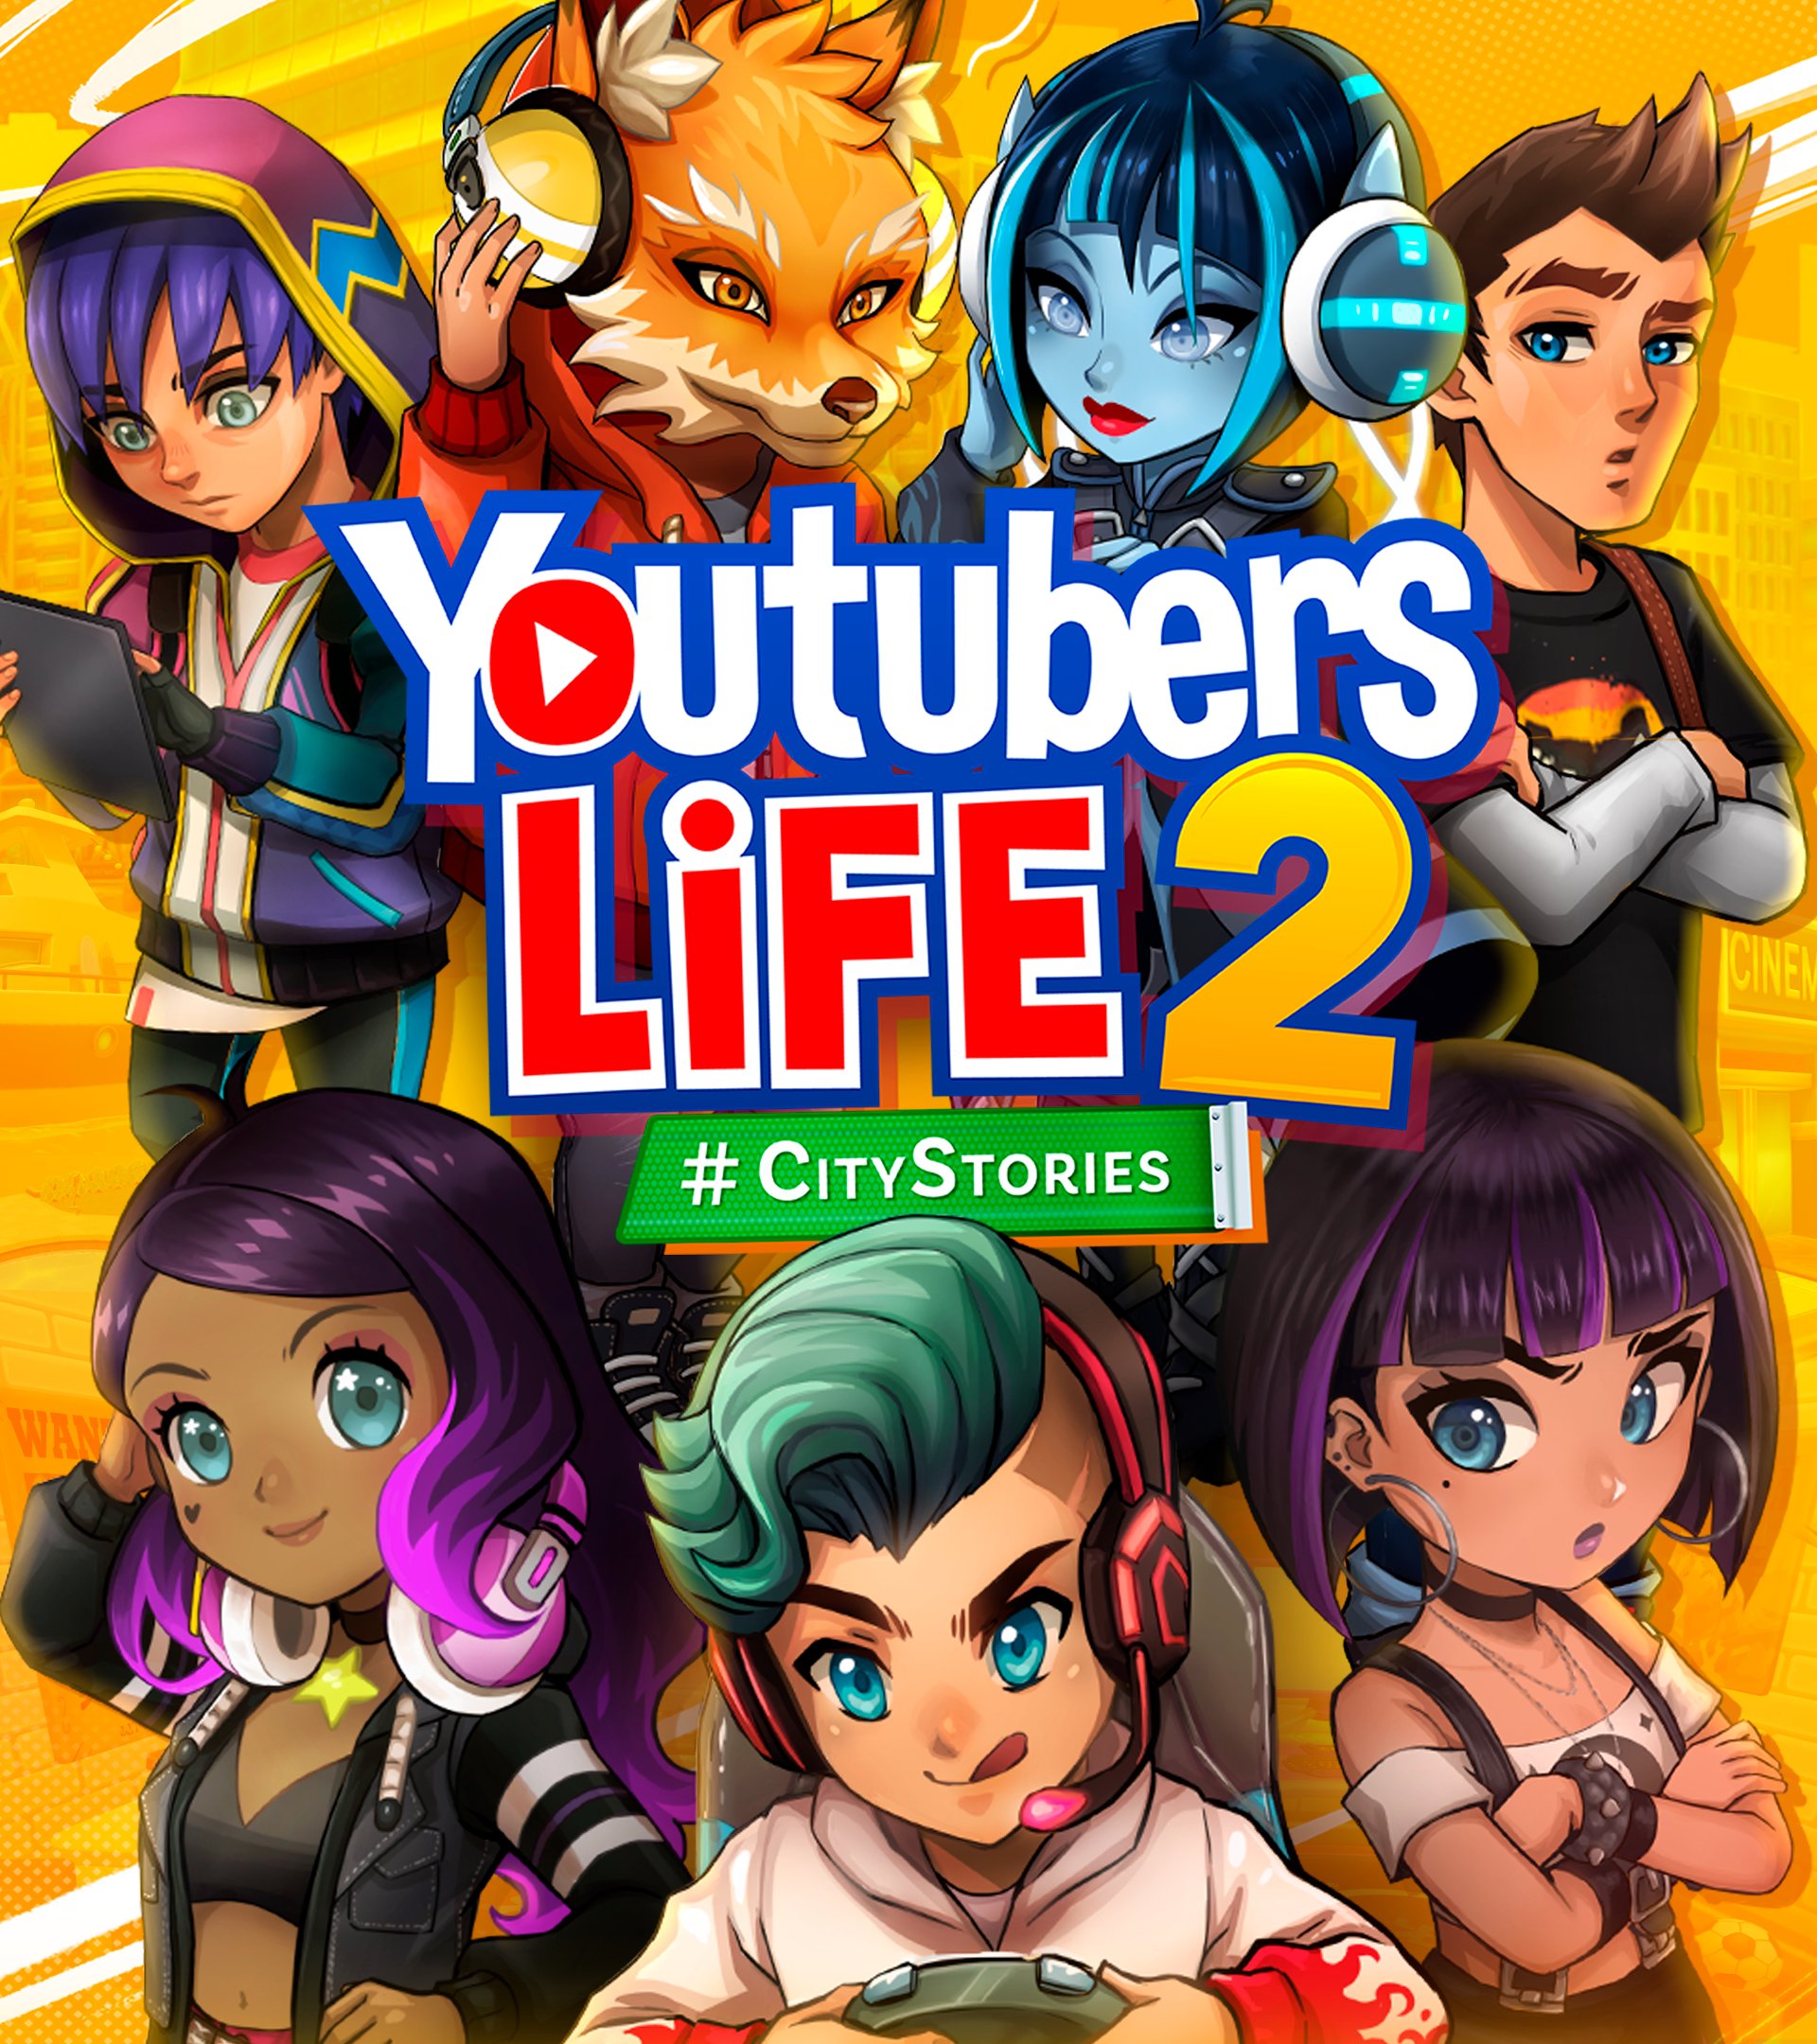 rs Life 2 Official Website - Out now!